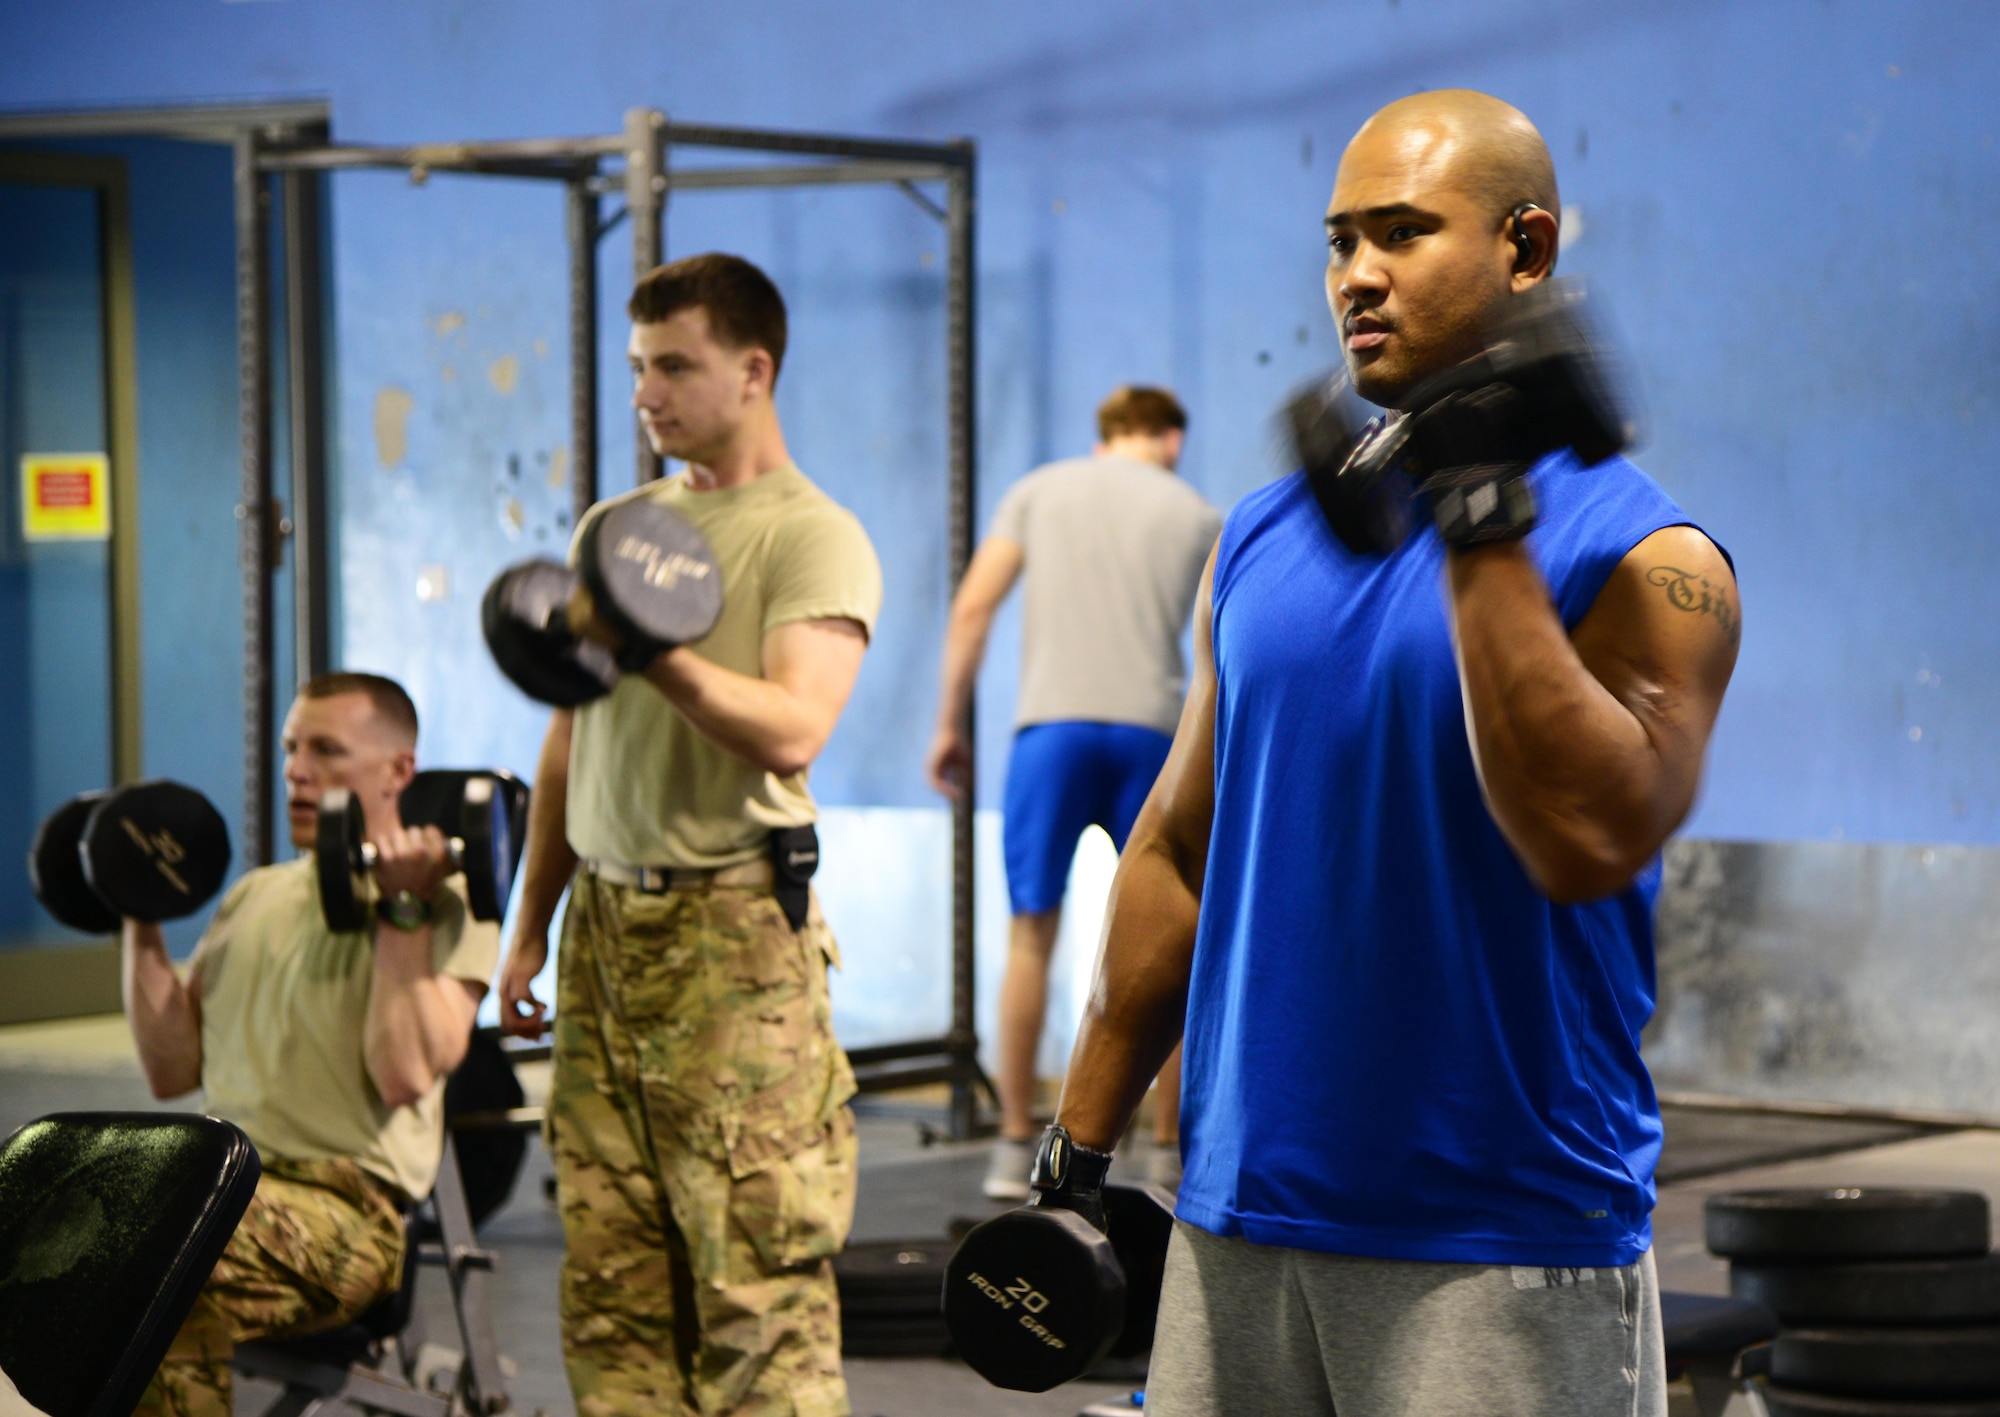 Servicemembers work-out at the Blatchford-Preston Complex Gym, Feb. 27, 2015, at Al Udeid Air Base, Qatar. Workout partners can help you stay committed to fitness while ensuring you are safely utilizing workout techniques. (U.S. Air Force photo by Staff Sgt. Mariko Frazee)